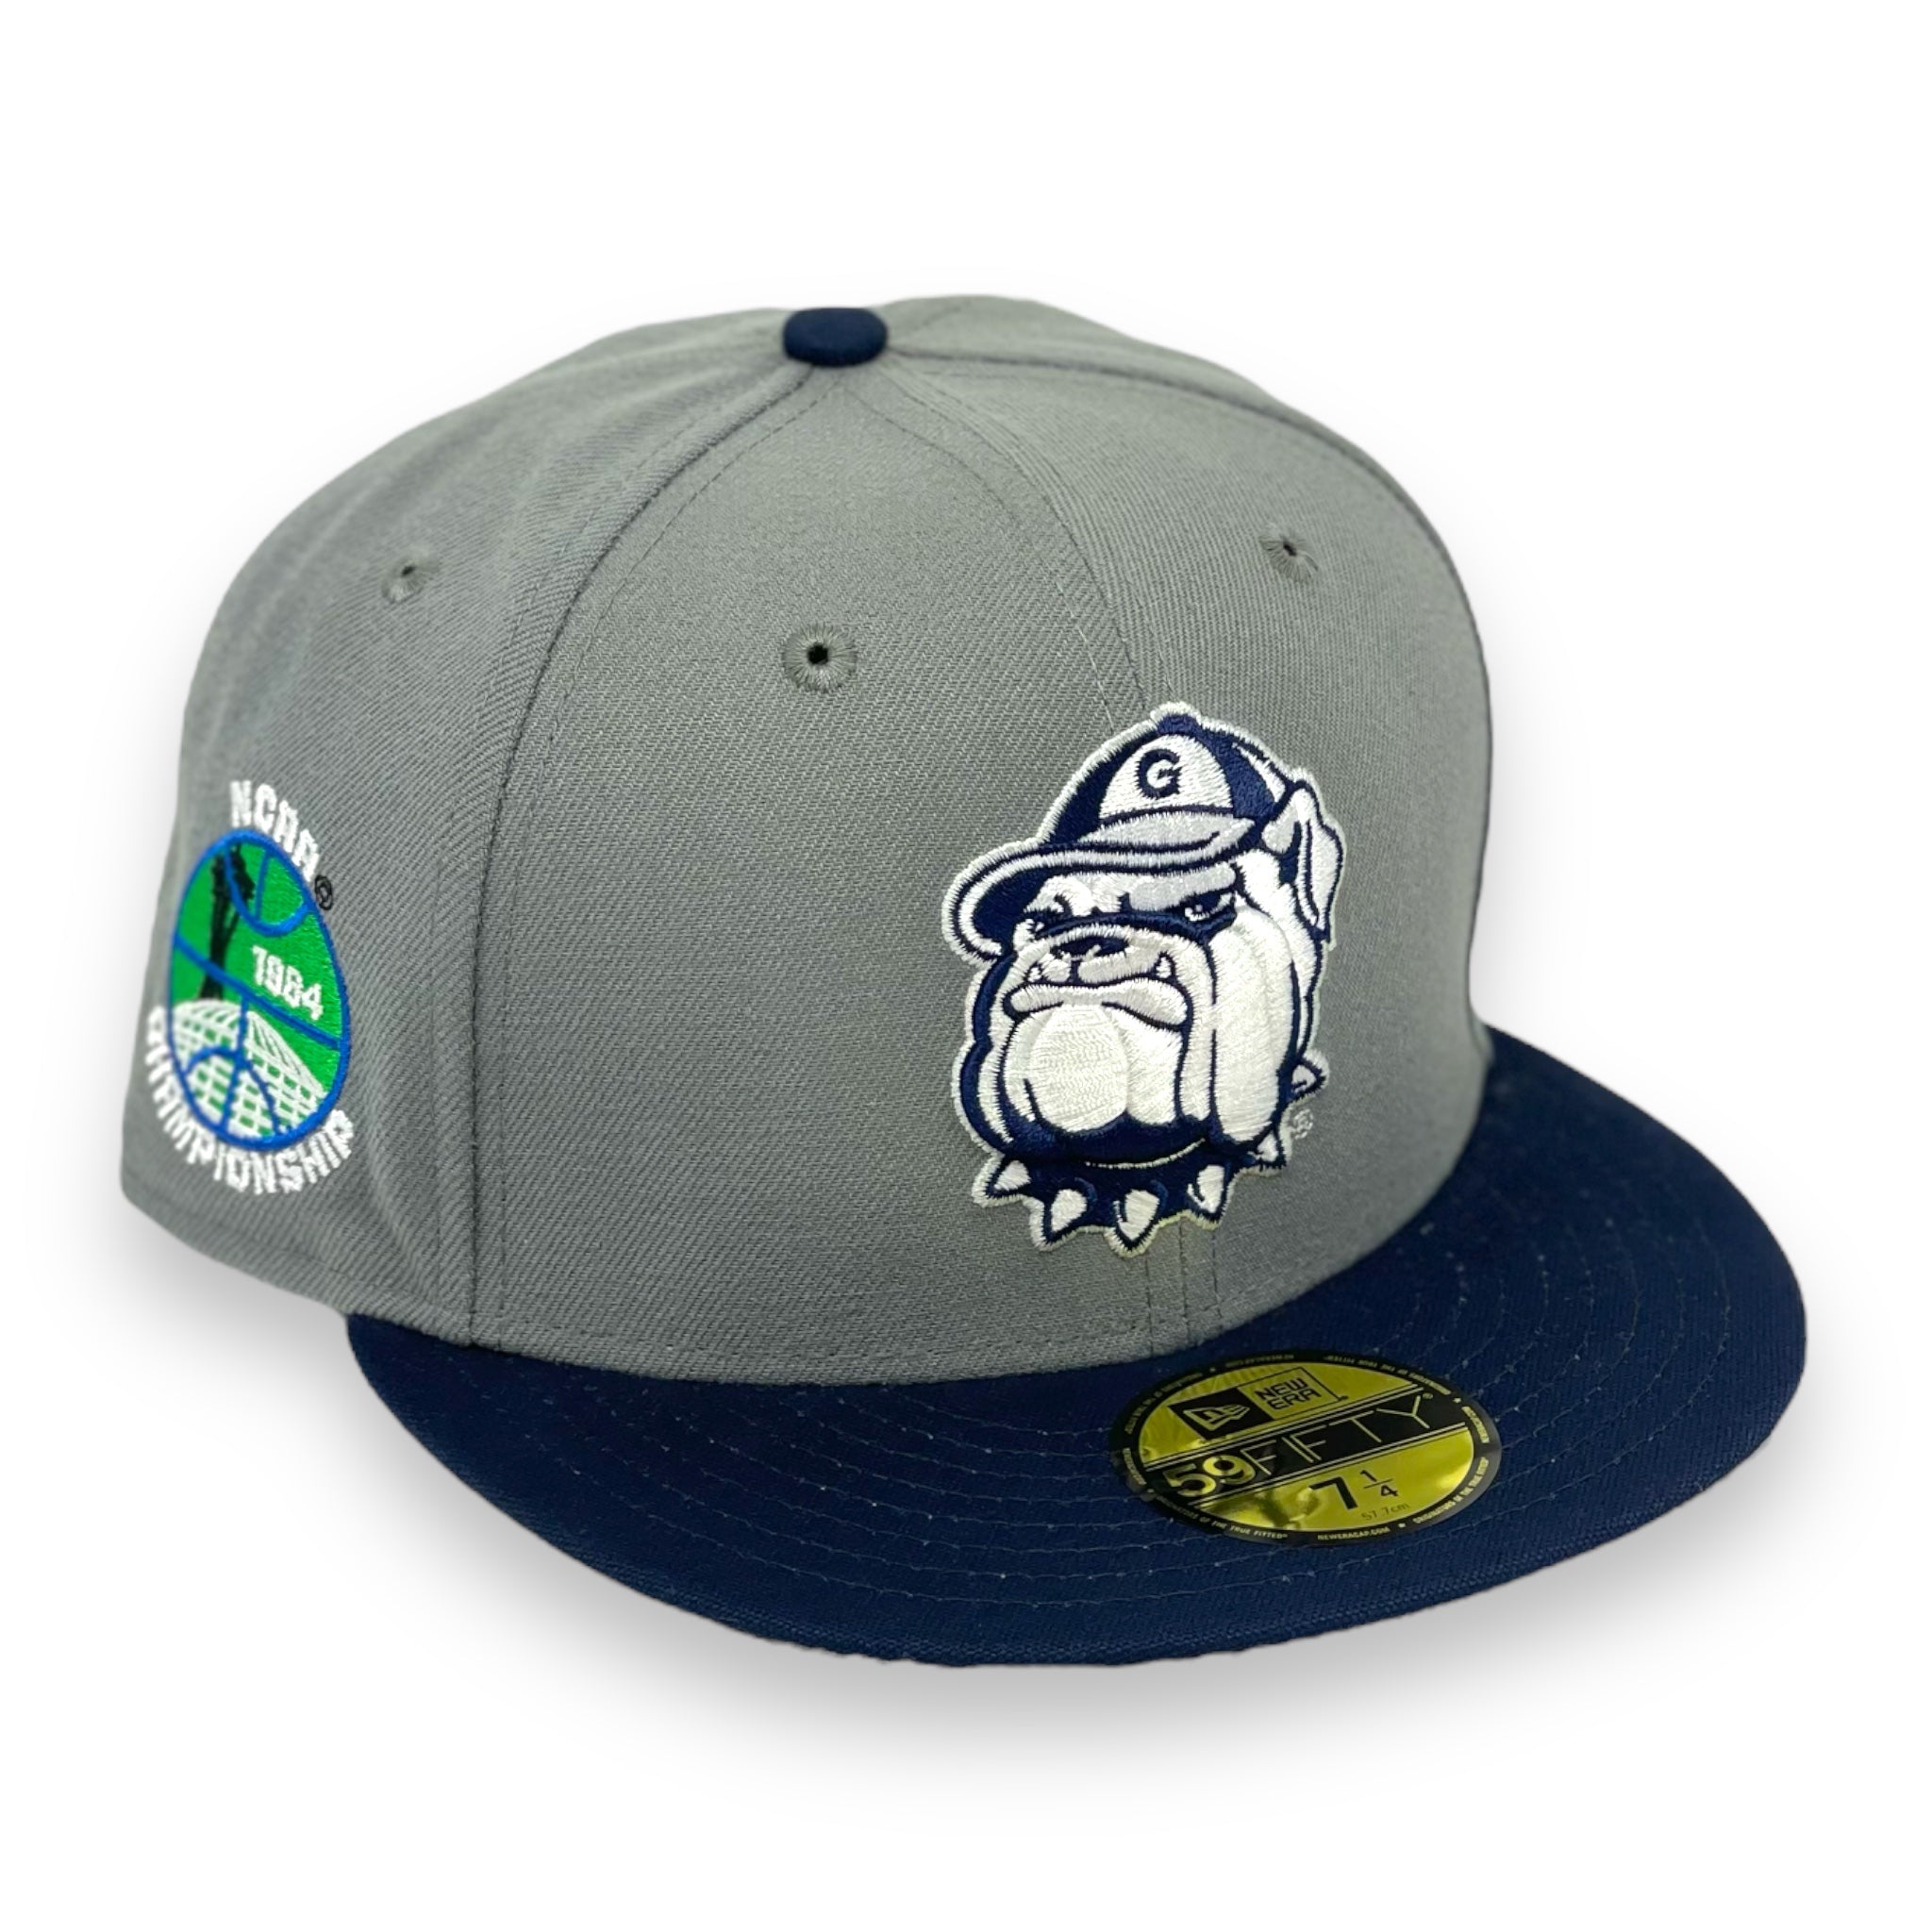 GEORGETOWN HOYAS (2-TONE) (1984 NCAA CHAMPIONSHIP GP) NEW ERA 59FIFTY FITTED